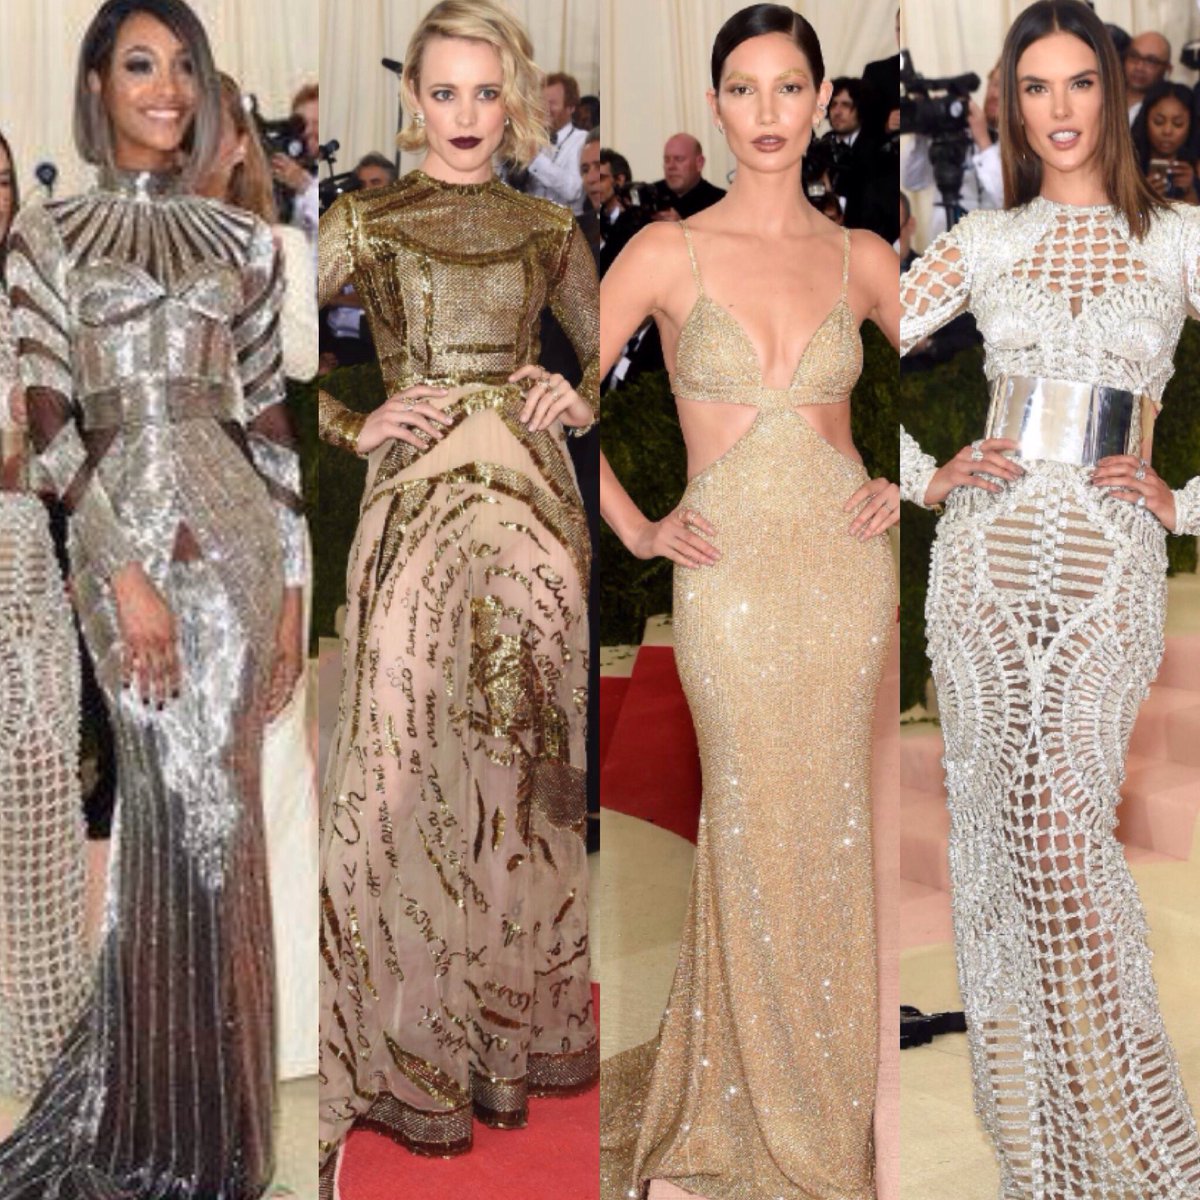 My fave looks from #MetBall ! I was feeling the neutral metallics! What were you faves? #MetGala #metball2016